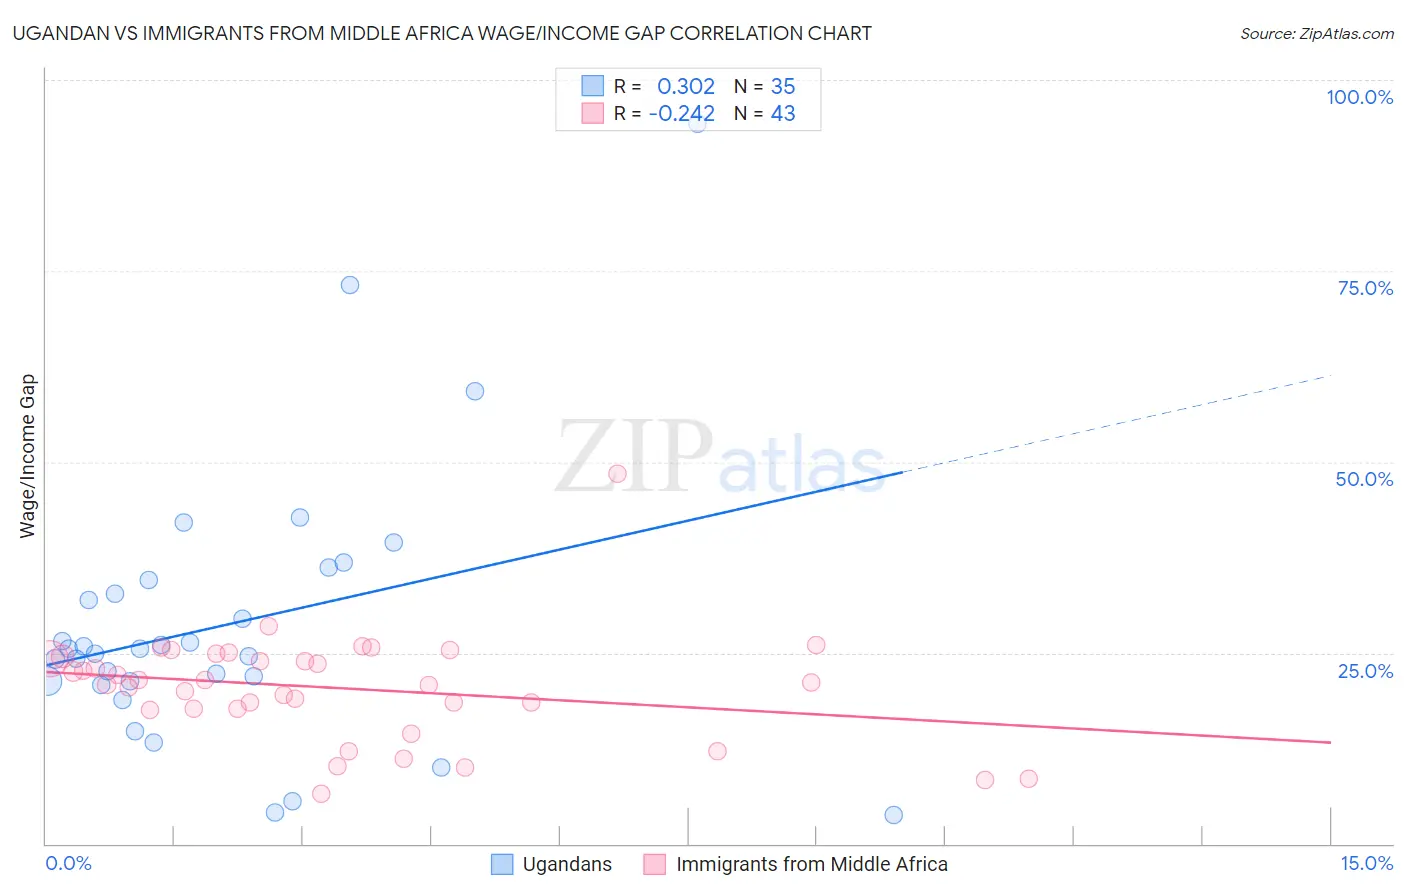 Ugandan vs Immigrants from Middle Africa Wage/Income Gap